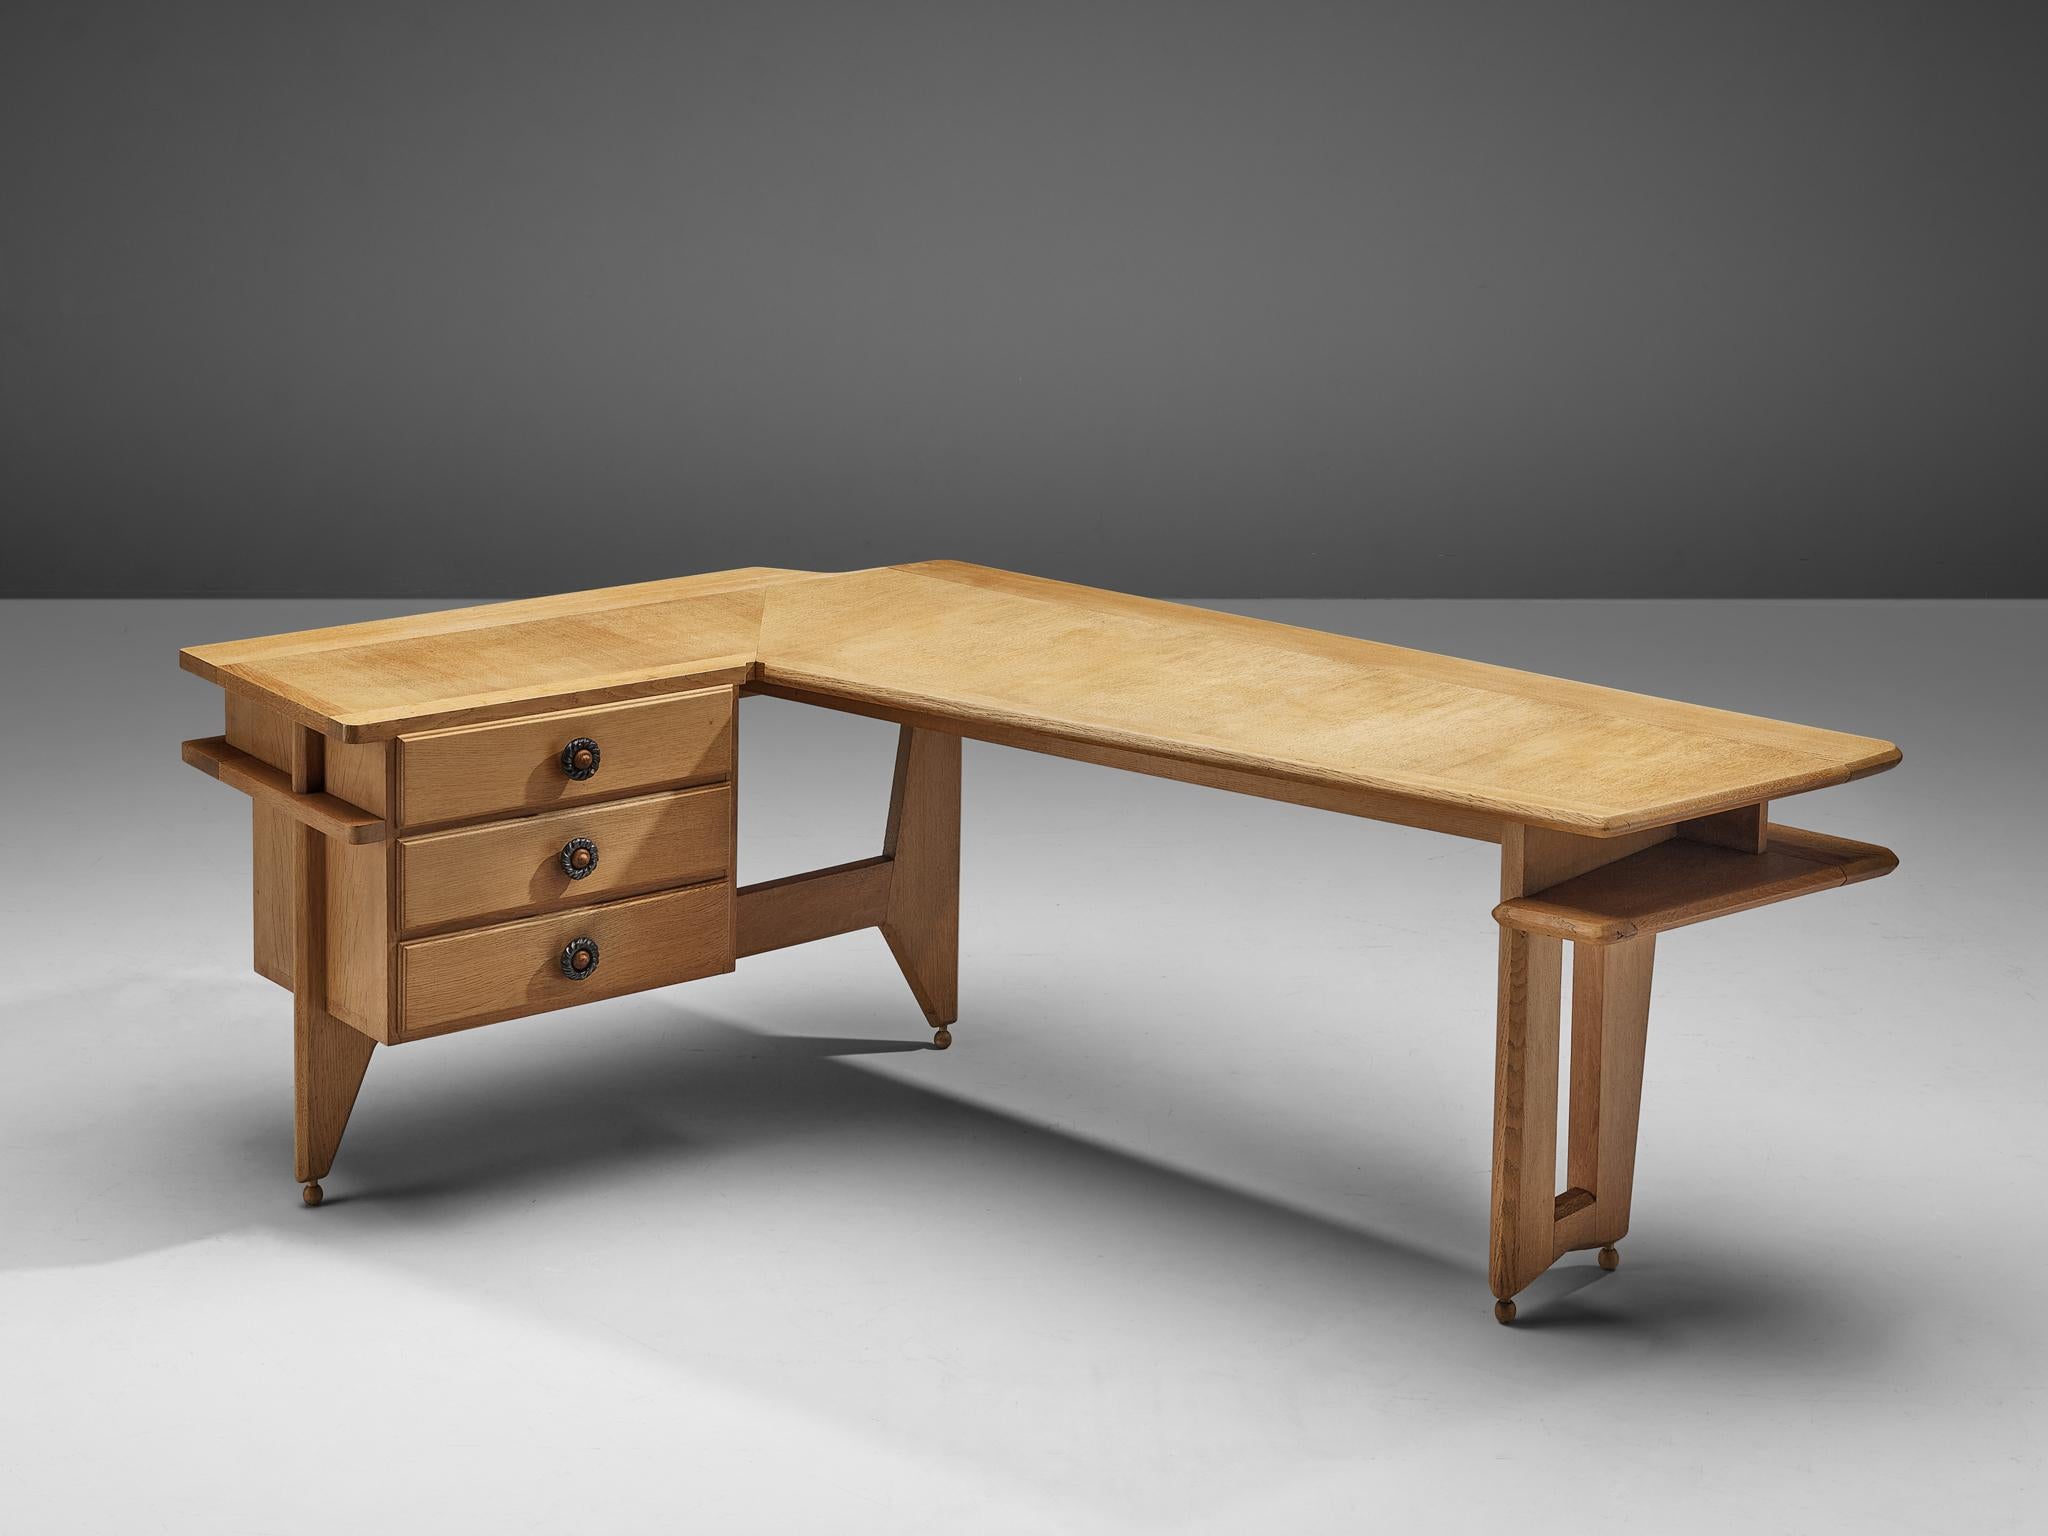 Guillerme et Chambron, corner desk in oak, France, 1960s.

This desk and return, is executed in solid oak by French designers Guillerme et Chambron. This elegant corner desk shows interesting details. First there is the shaped of the top, which is